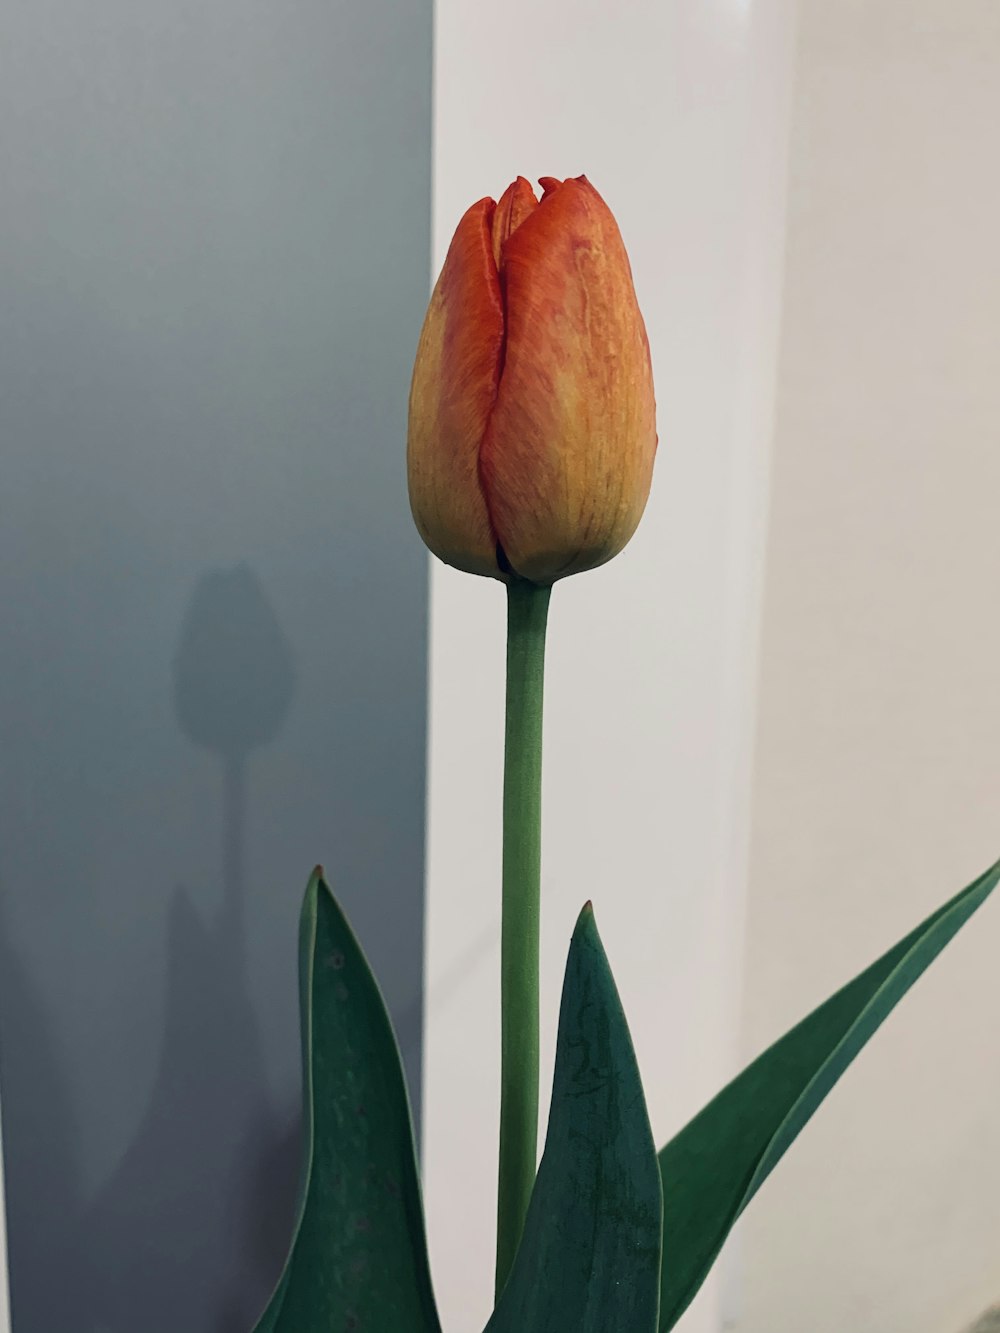 orange and green tulip in close up photography